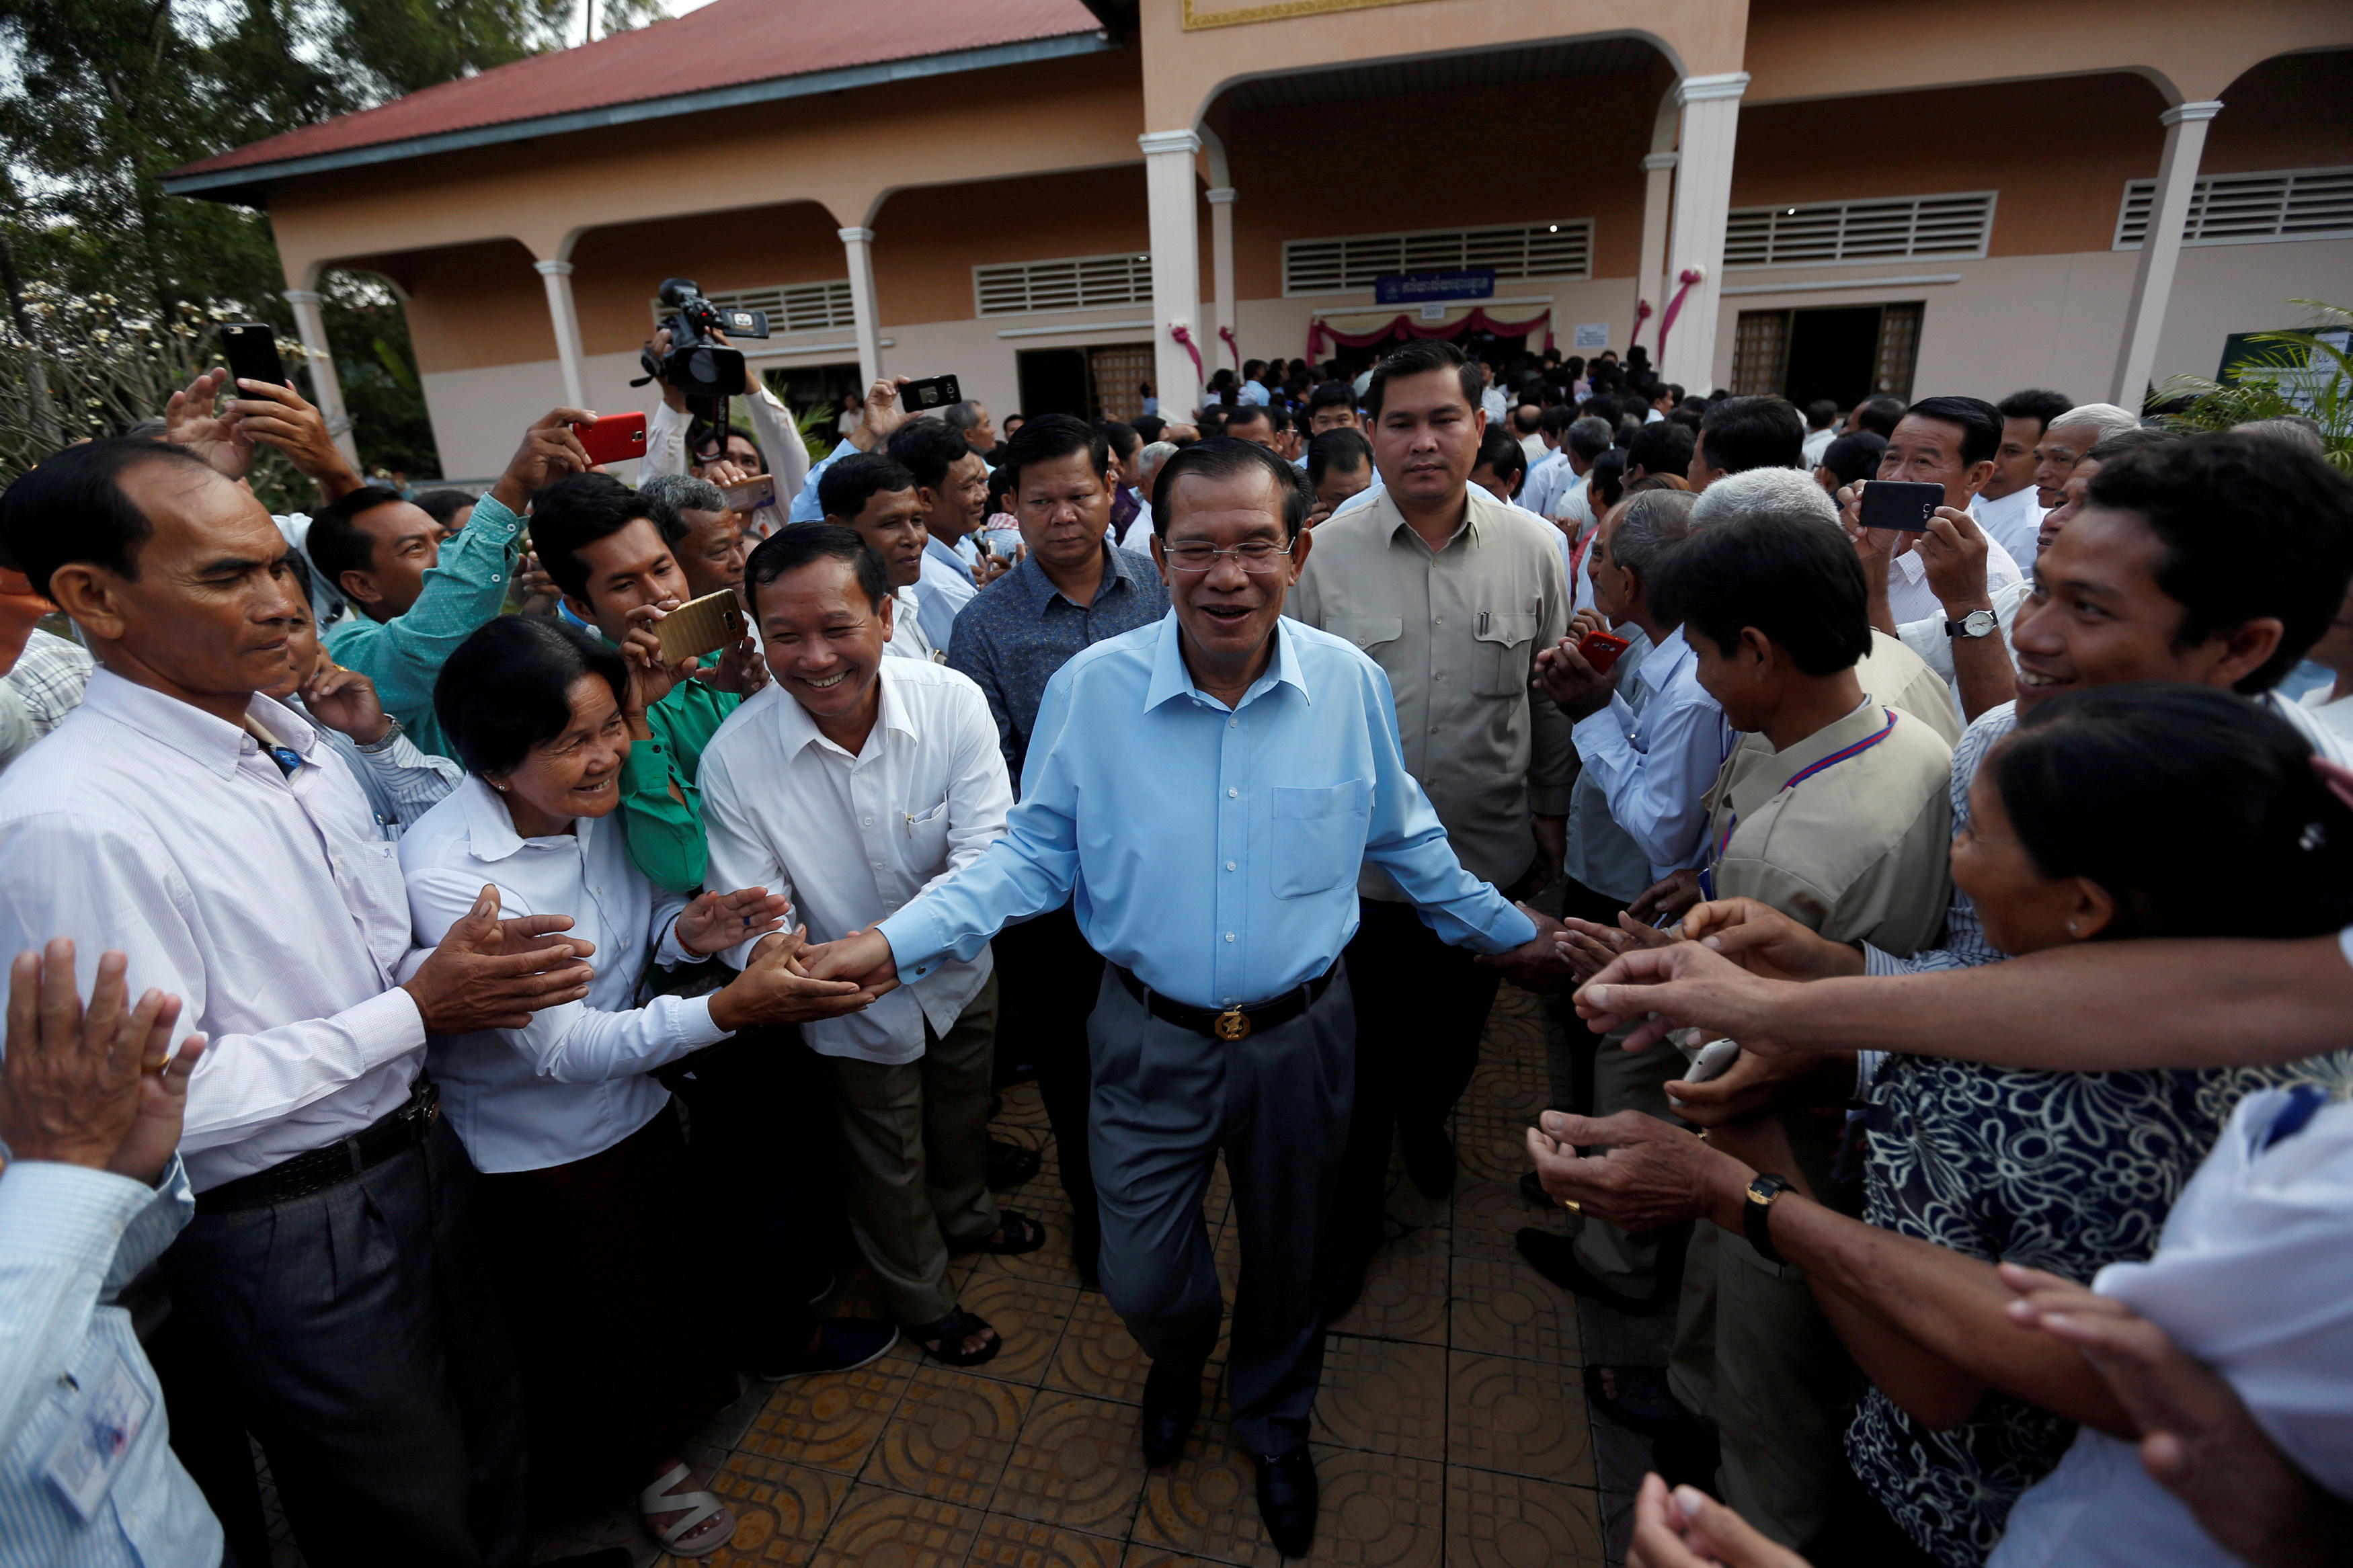 Cambodia's Prime Minister Hun Sen surrounded by commune counselors during at a Senate election polling station in Takhmao, Kandal province, Cambodia on Feb. 25, 2018. (Pring Samrang—Reuters)